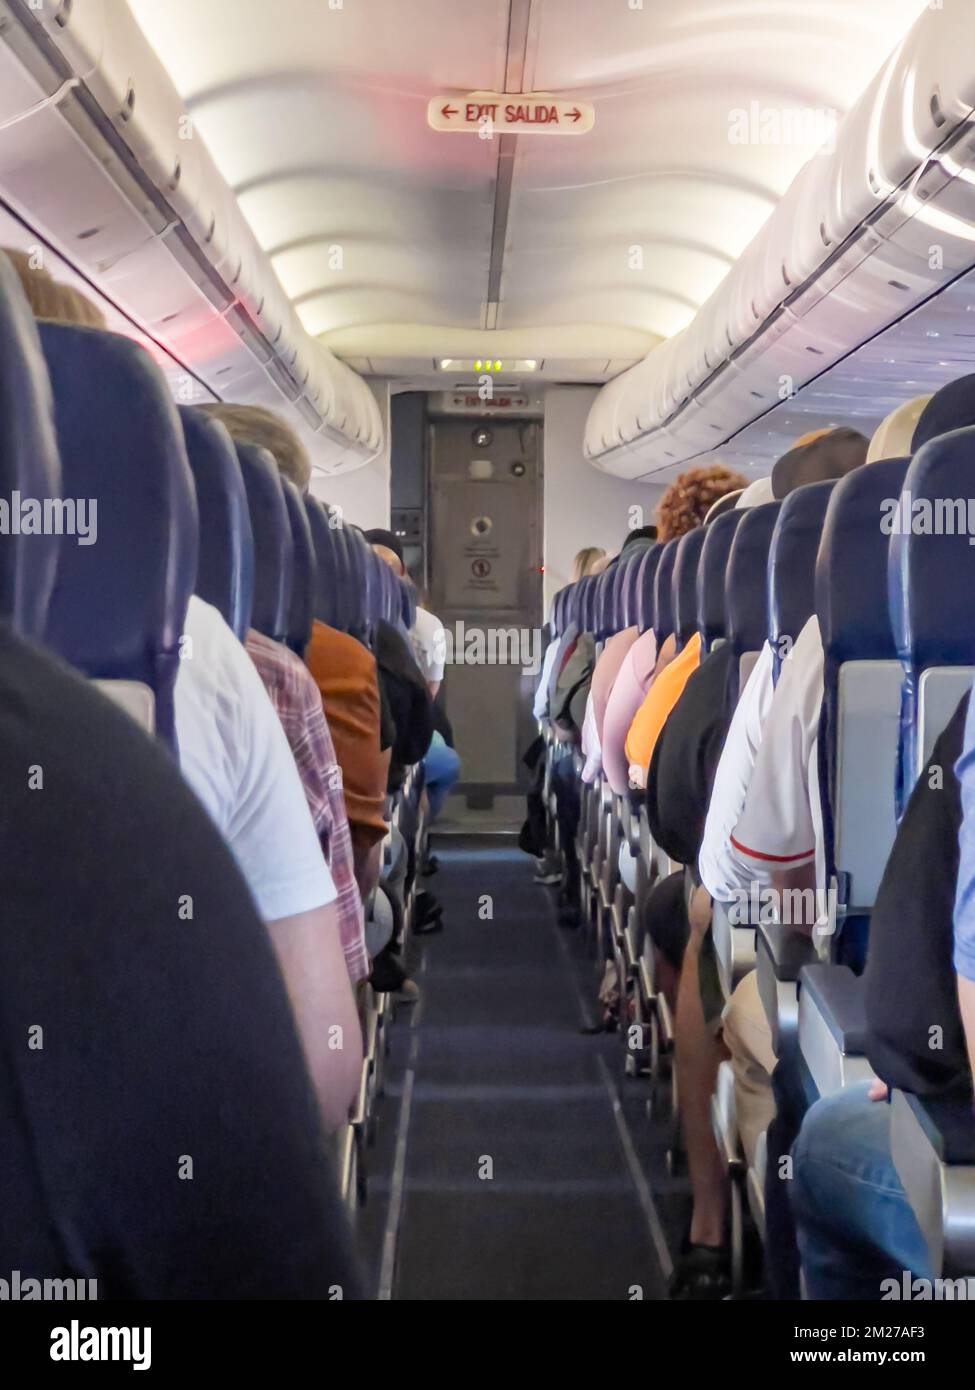 Airplane interior cabin packed full with passengers Stock Photo